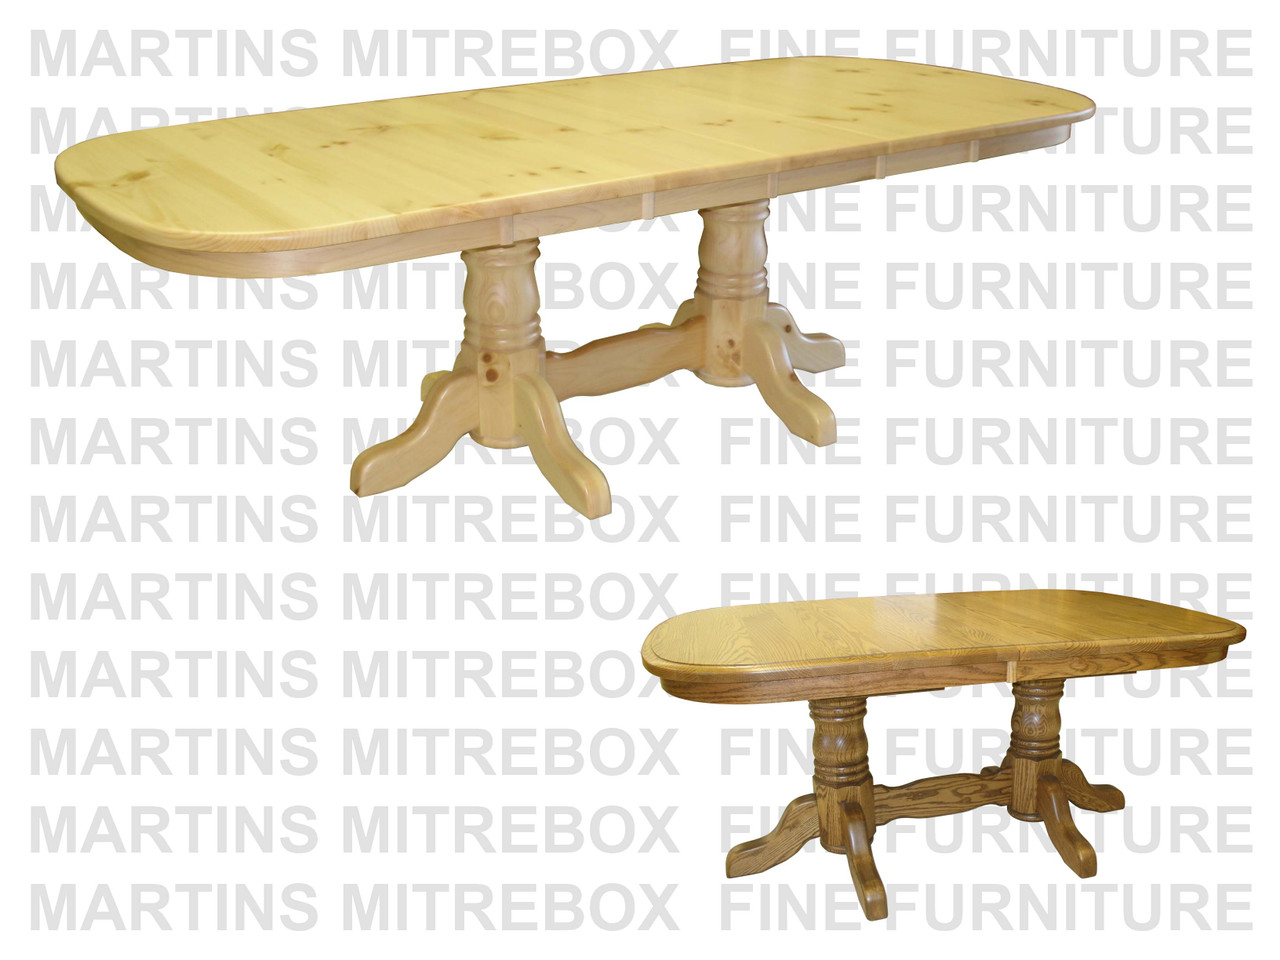 Oak Martin Collection Double Pedestal Table 42''D x 66''W x 30''H With 3 - 12'' Leaves Table Has 1'' Thick Top